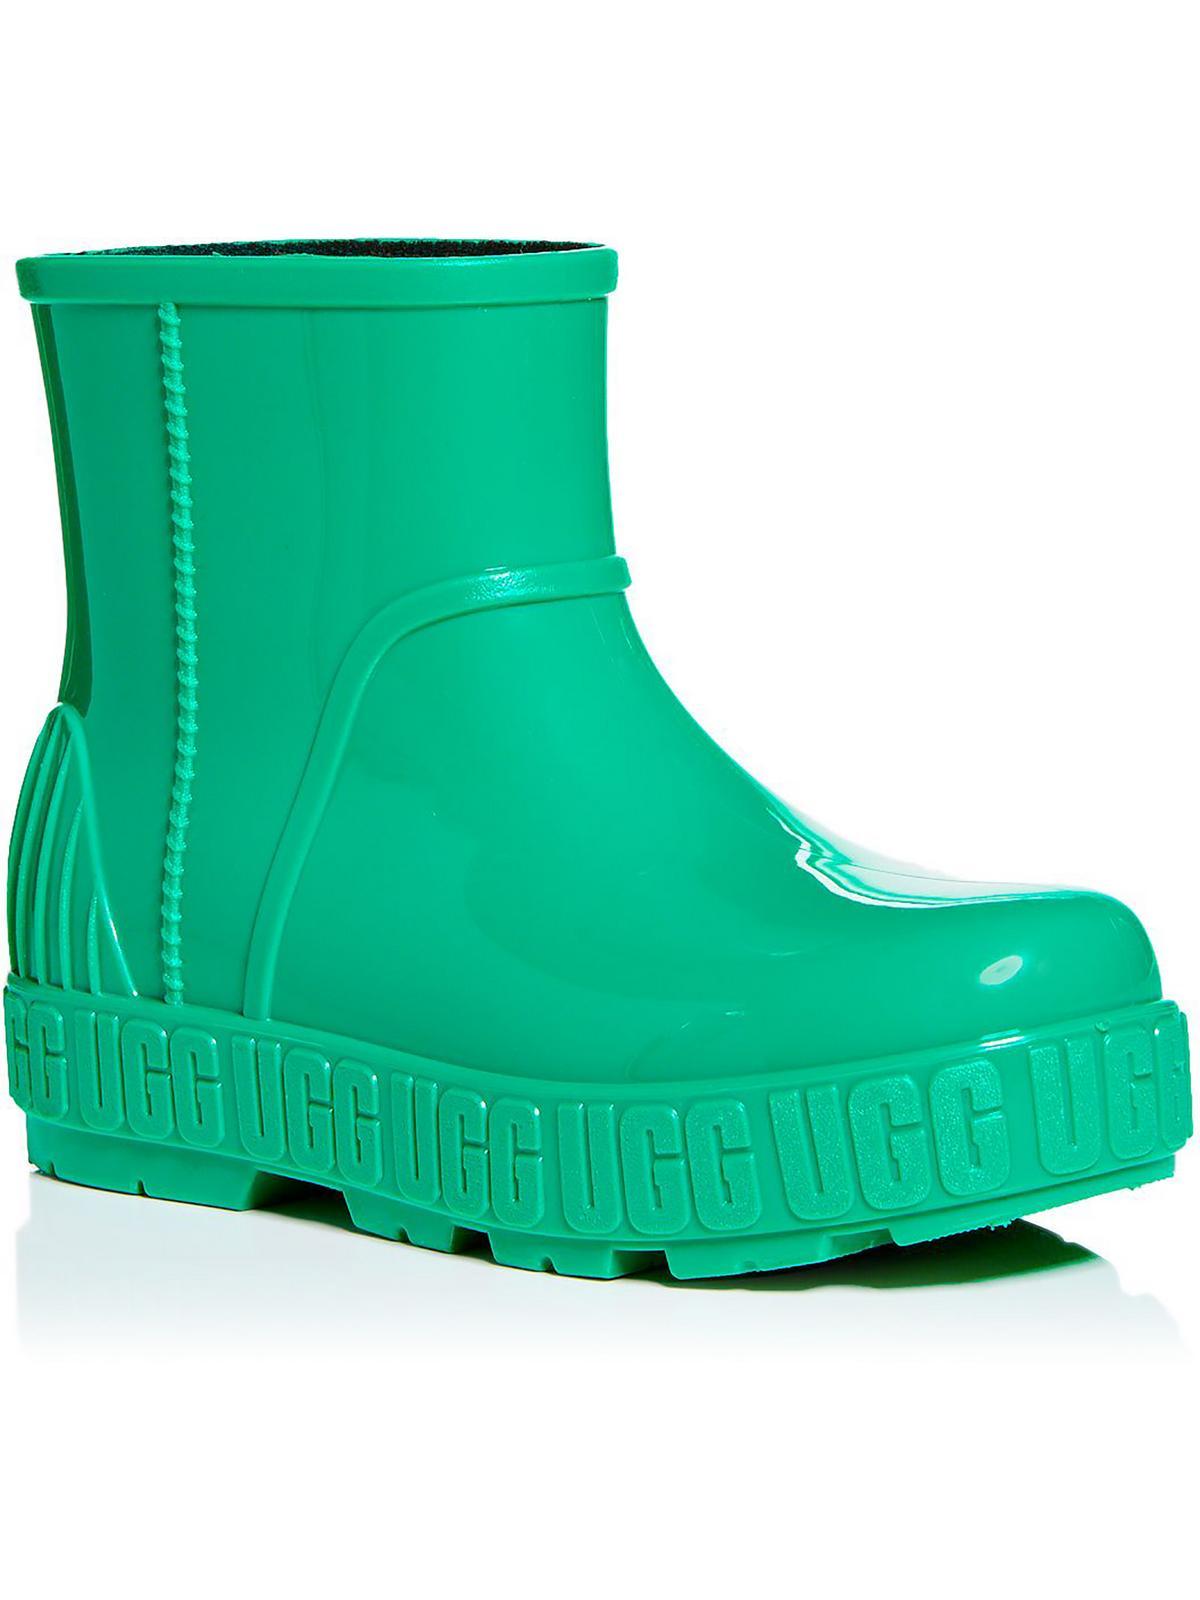 UGG Drizlita Patent Leather Ankle Rain Boots in Green | Lyst